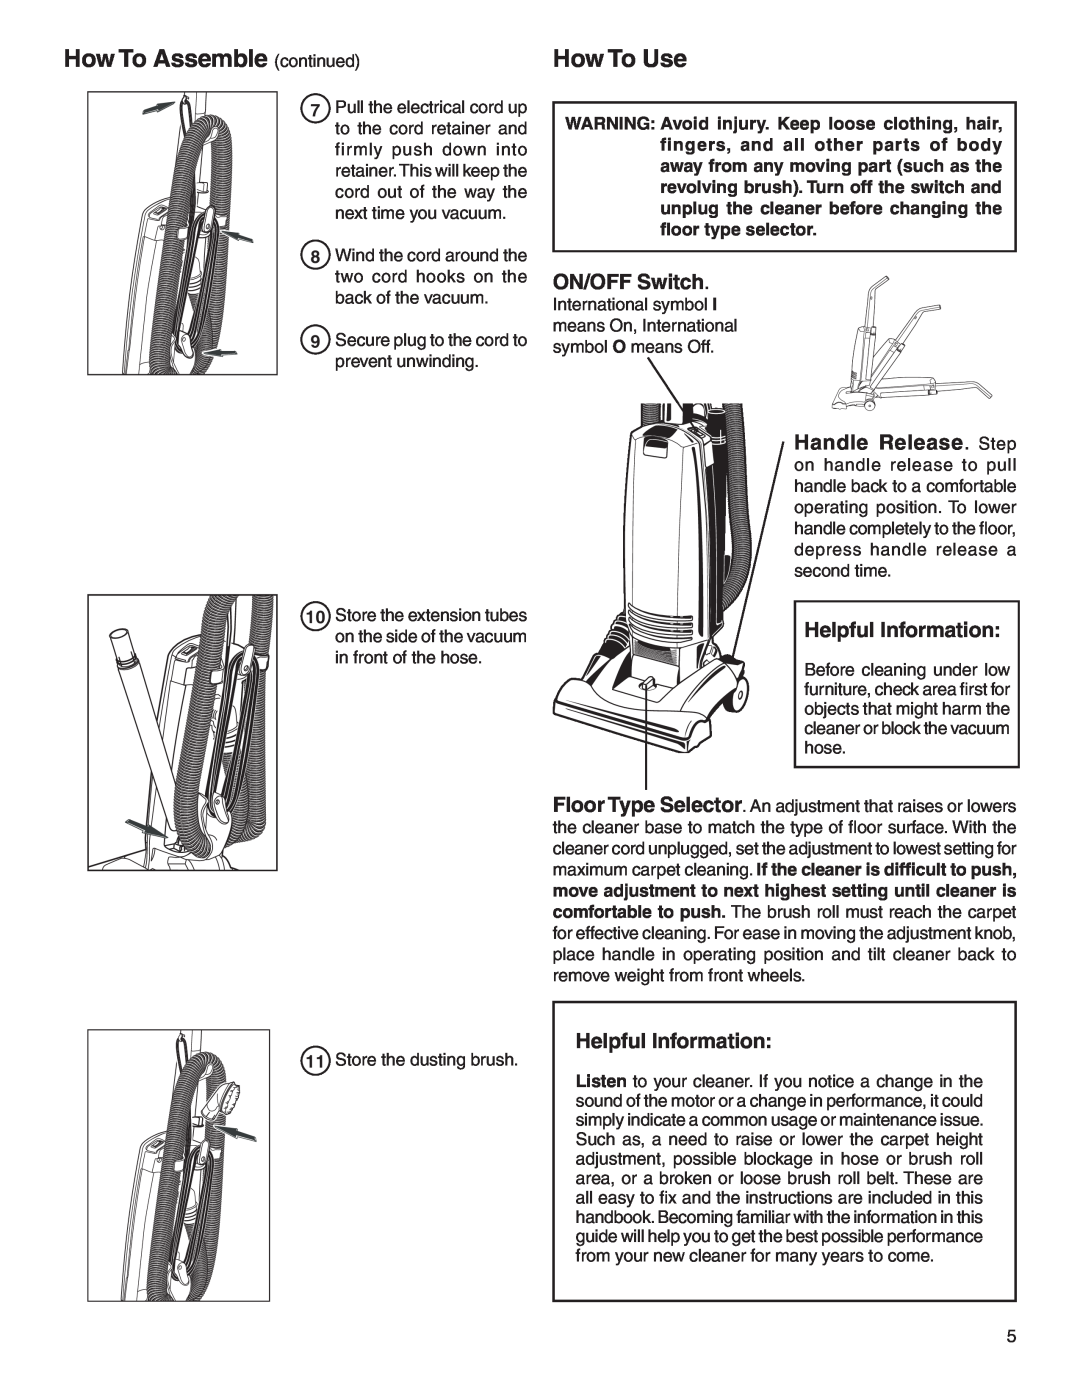 Electrolux Z2900 Series manual How To Assemble continued, ON/OFF Switch, Helpful Information, How To Use 